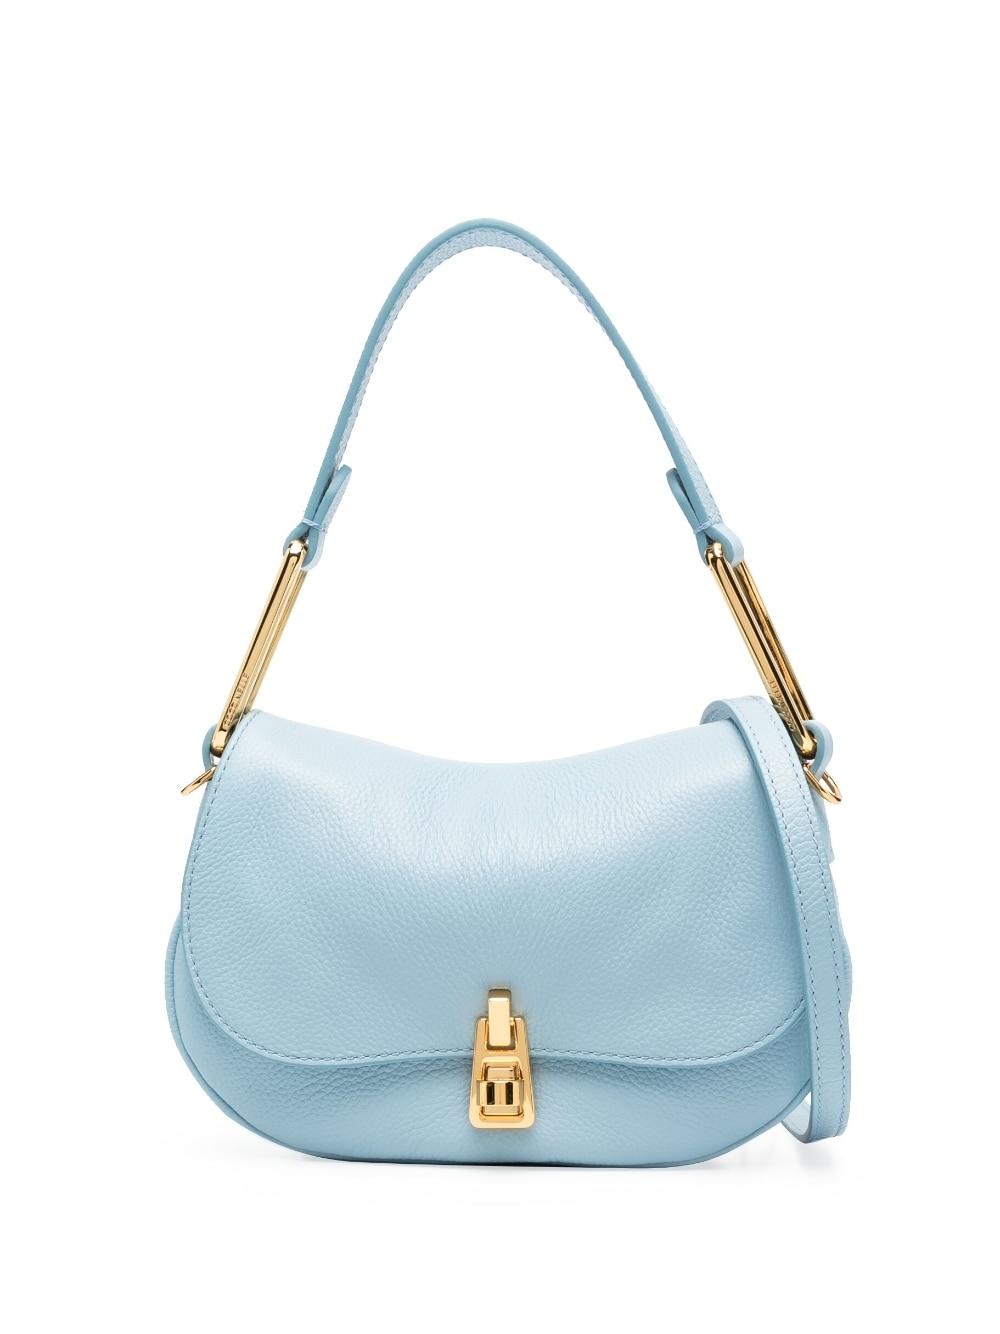 Coccinelle Magie Leather Tote Bag in Blue | Lyst